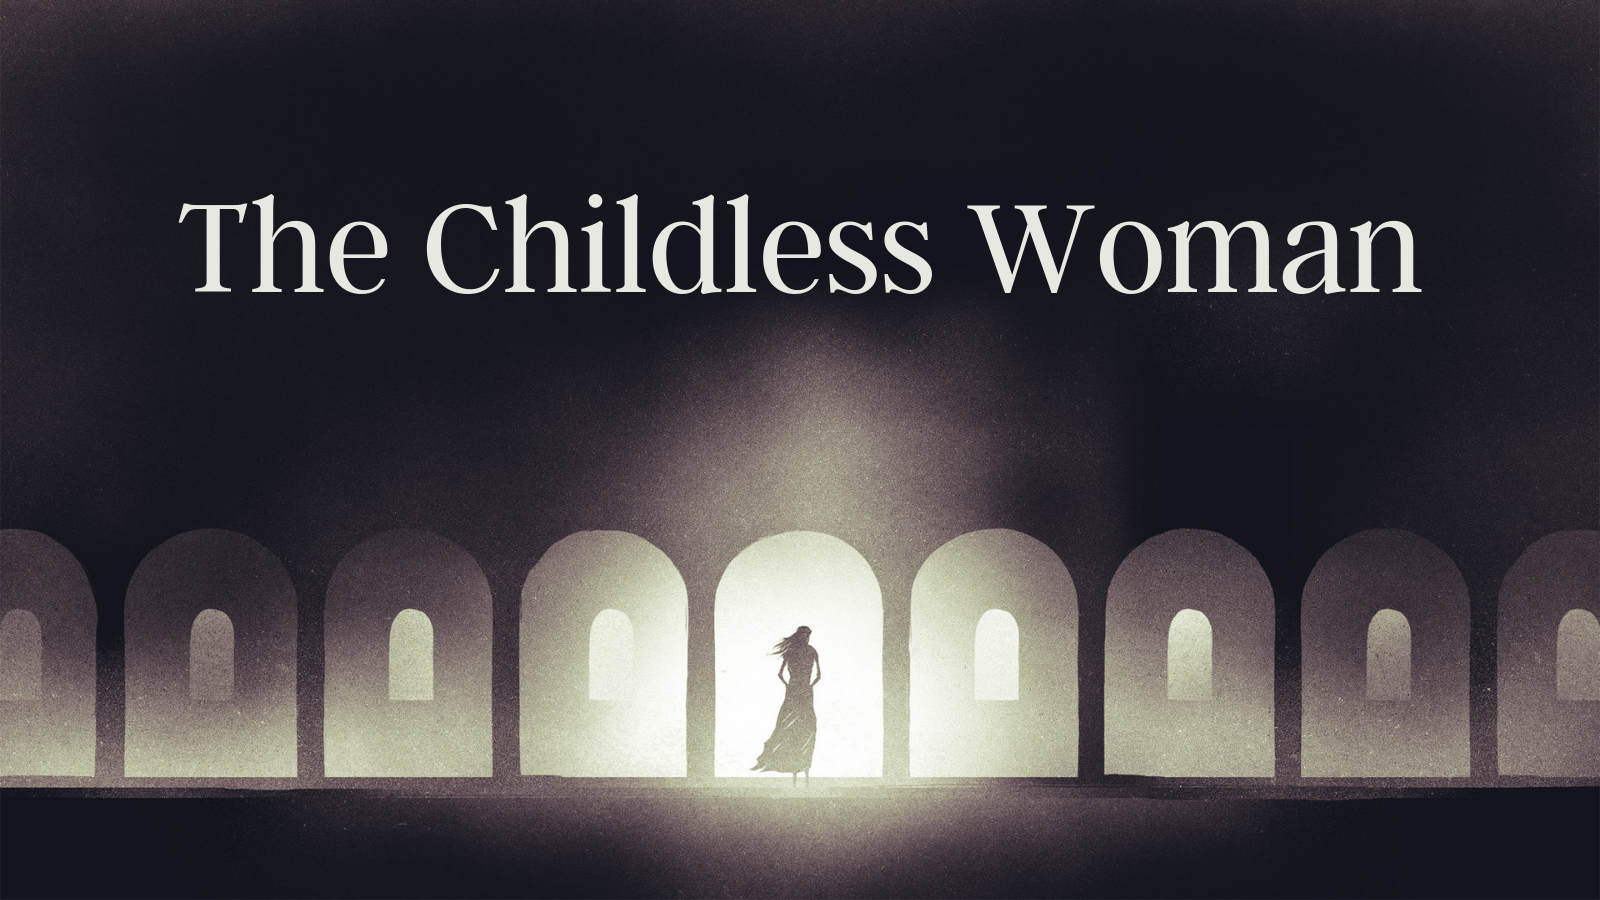 https://intownlutheran.com/wp-content/uploads/2019/09/cropped-The-Childless-Woman.png